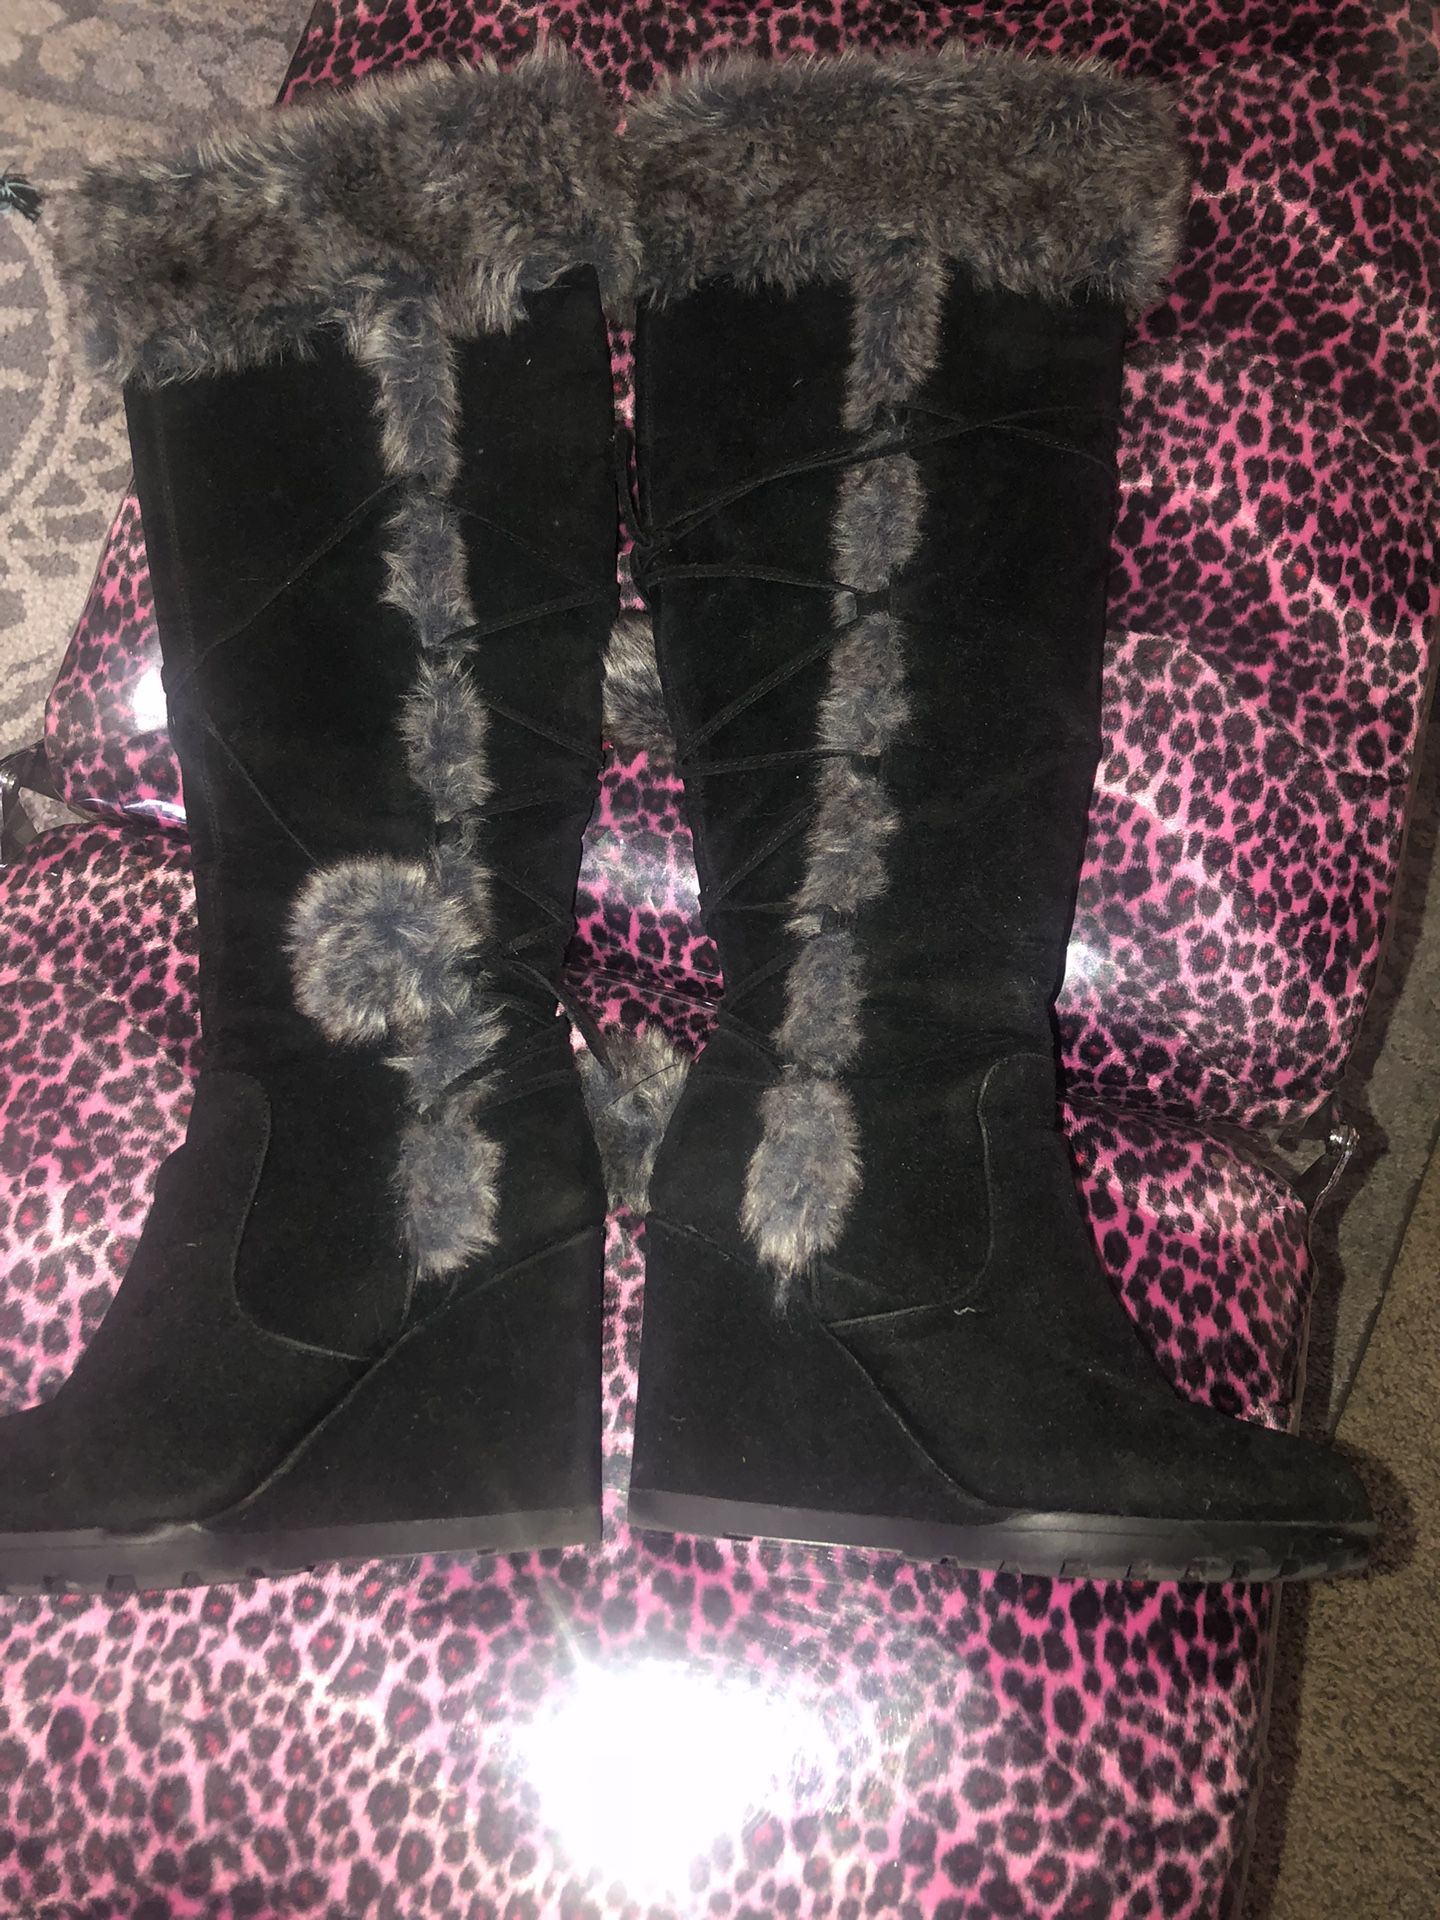 Shebedazzle Thigh High Boots